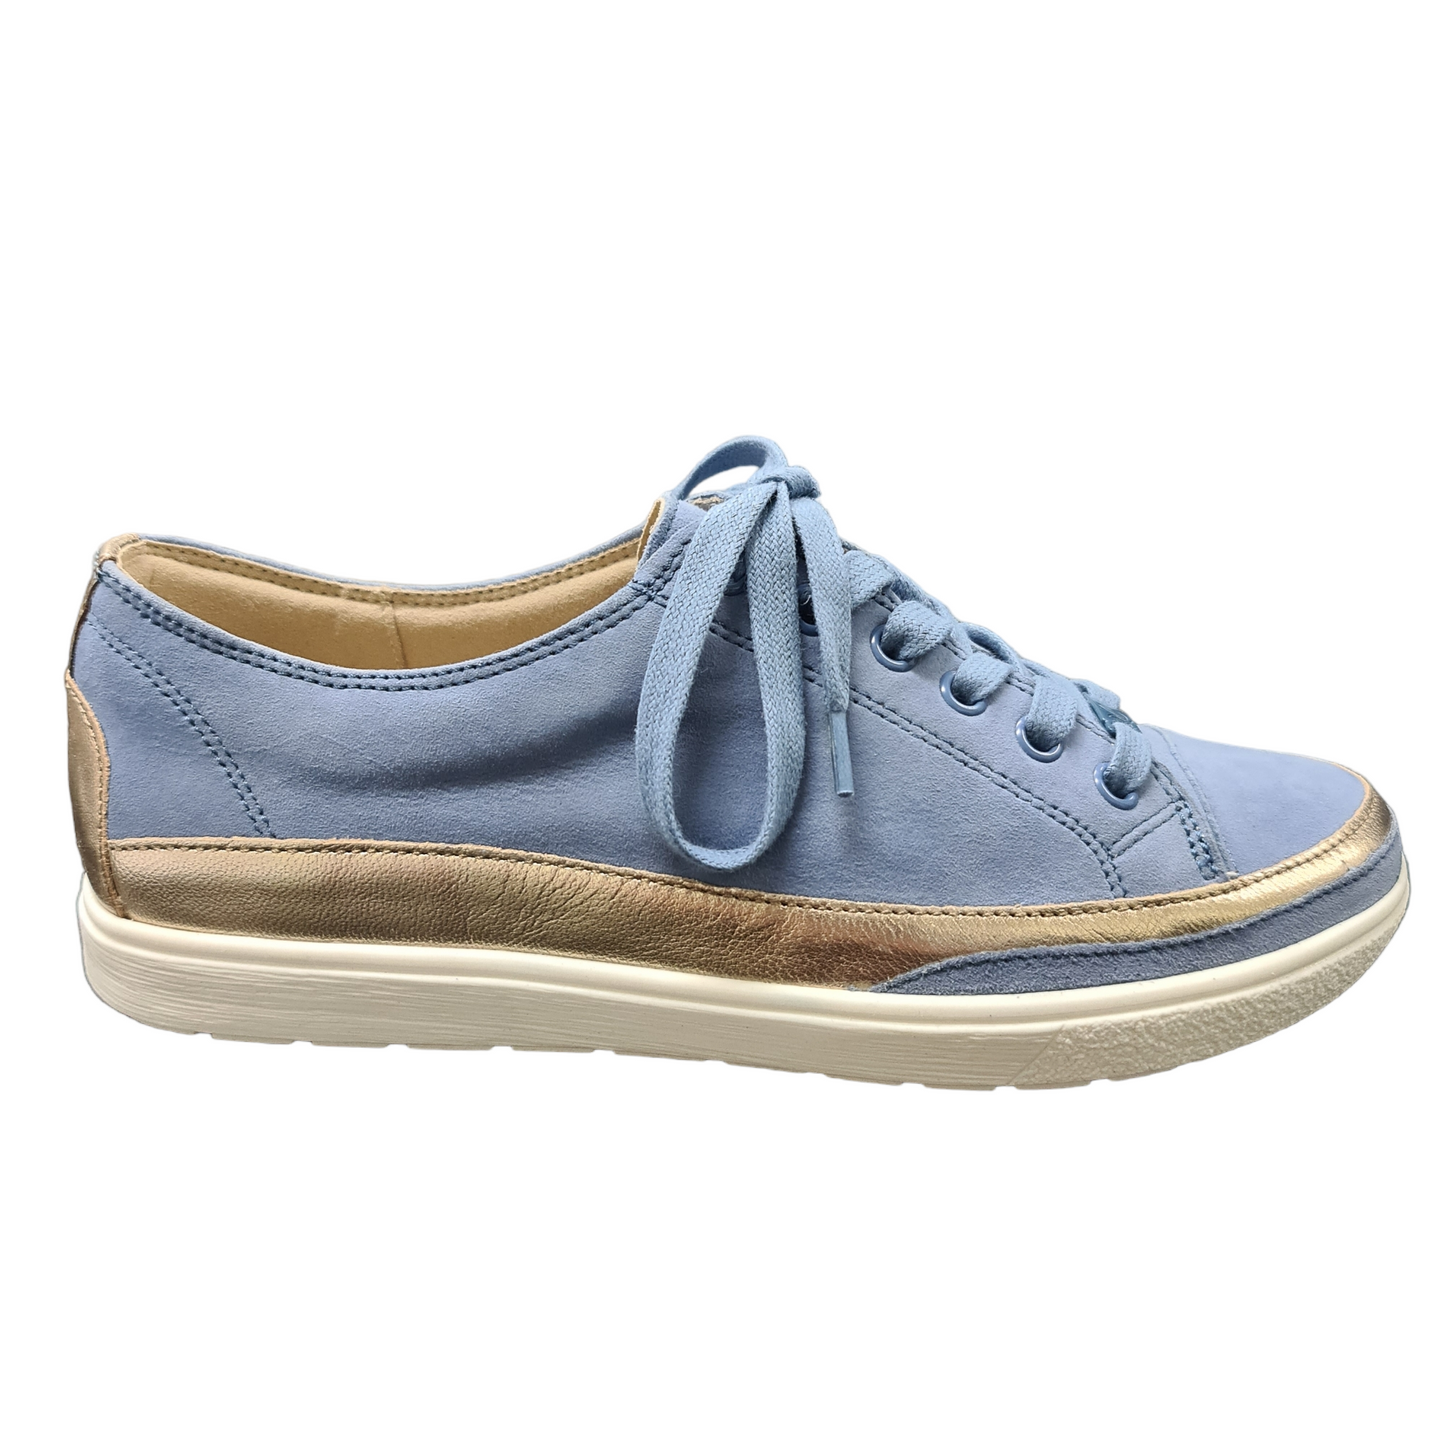 Caprice 23654-20 Blue Trainers